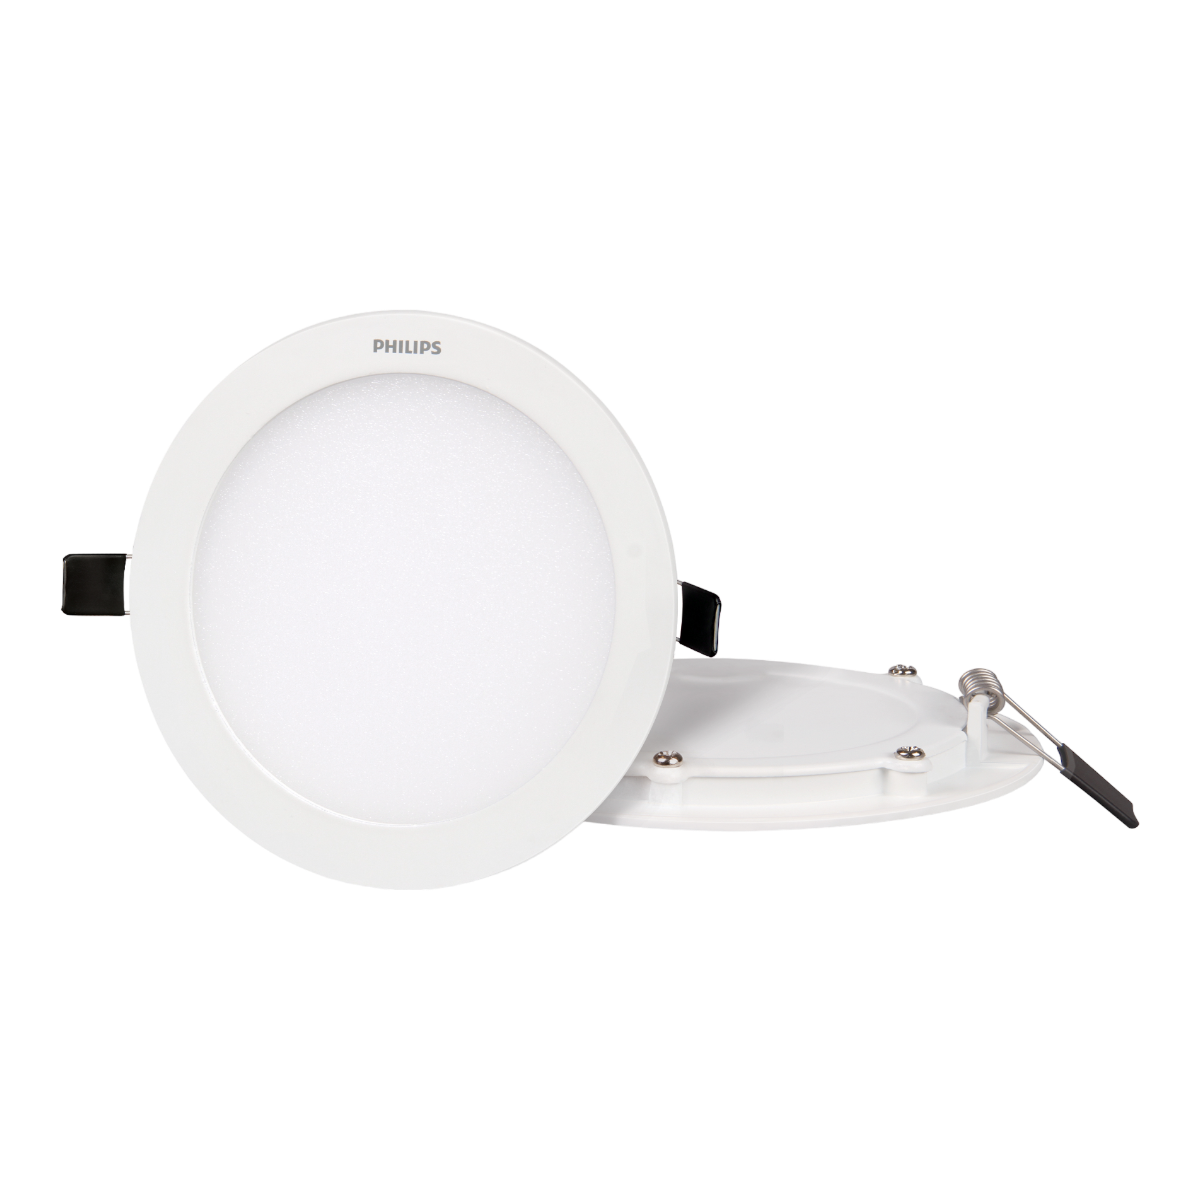 Philips LED Ceiling Light, 6 W - 10 W at Rs 100/piece in Chennai